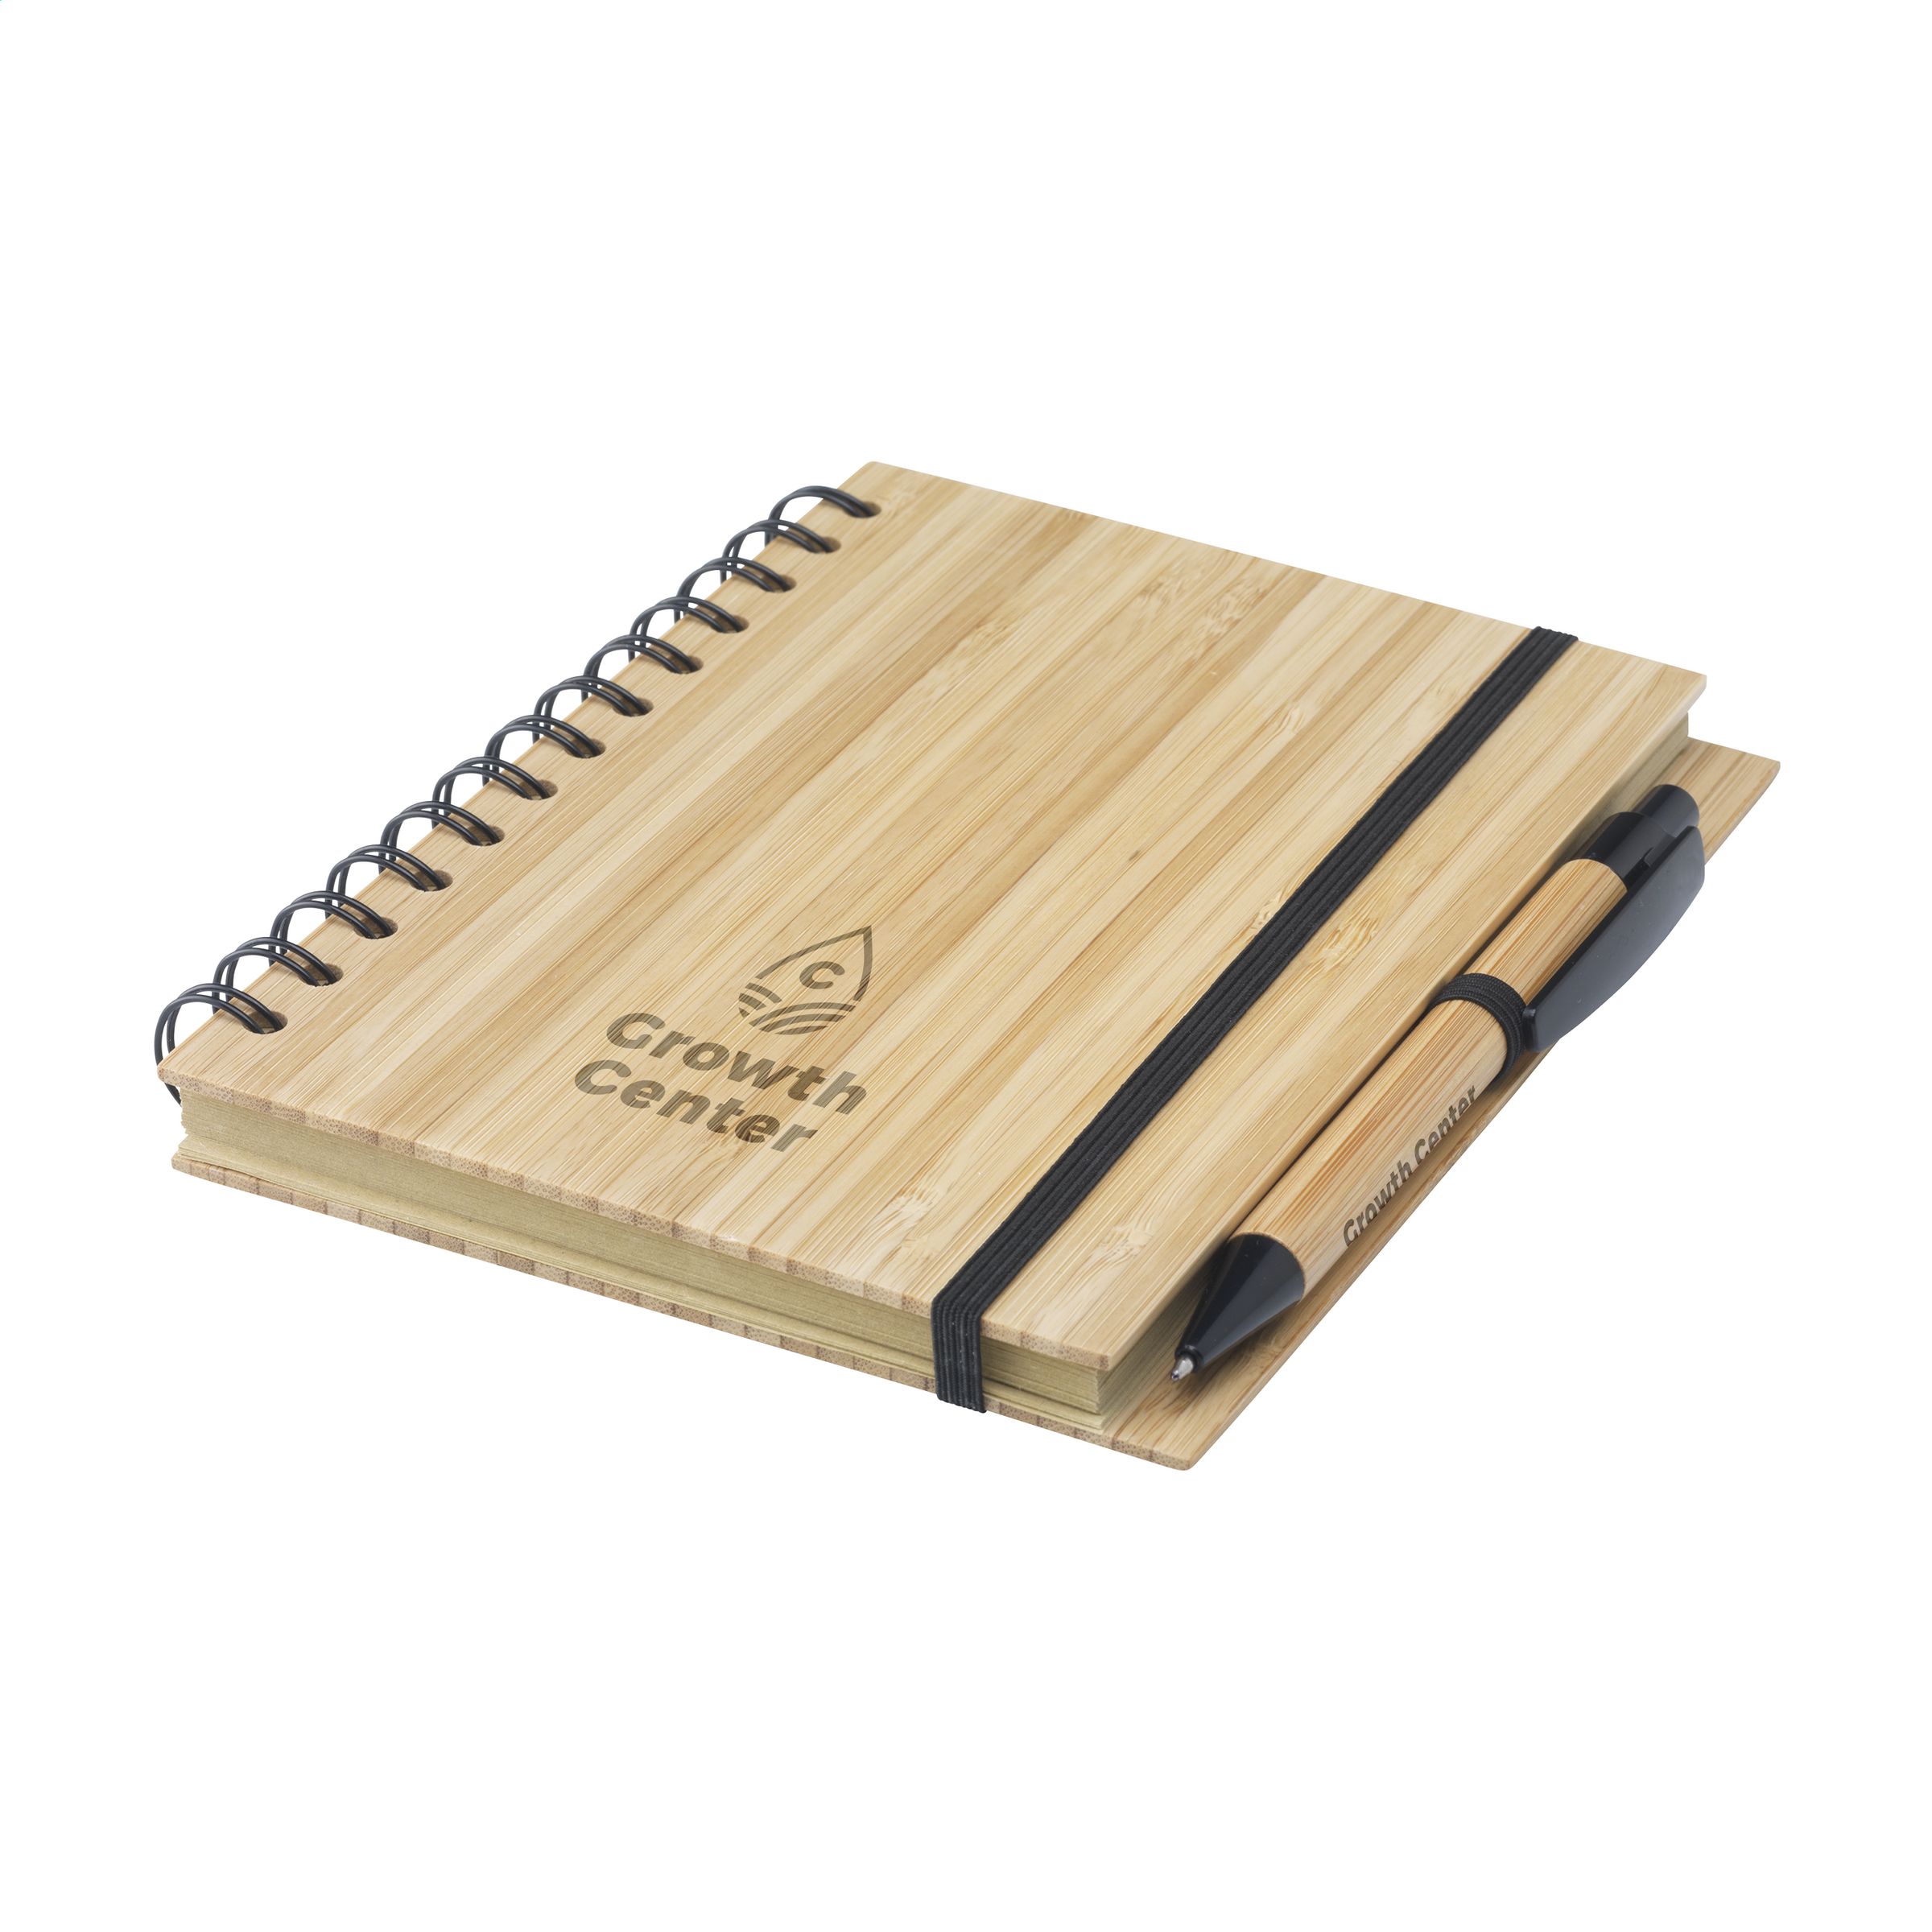 An eco-friendly notebook made from bamboo that comes with a matching bamboo ballpoint pen with blue ink - Brierley